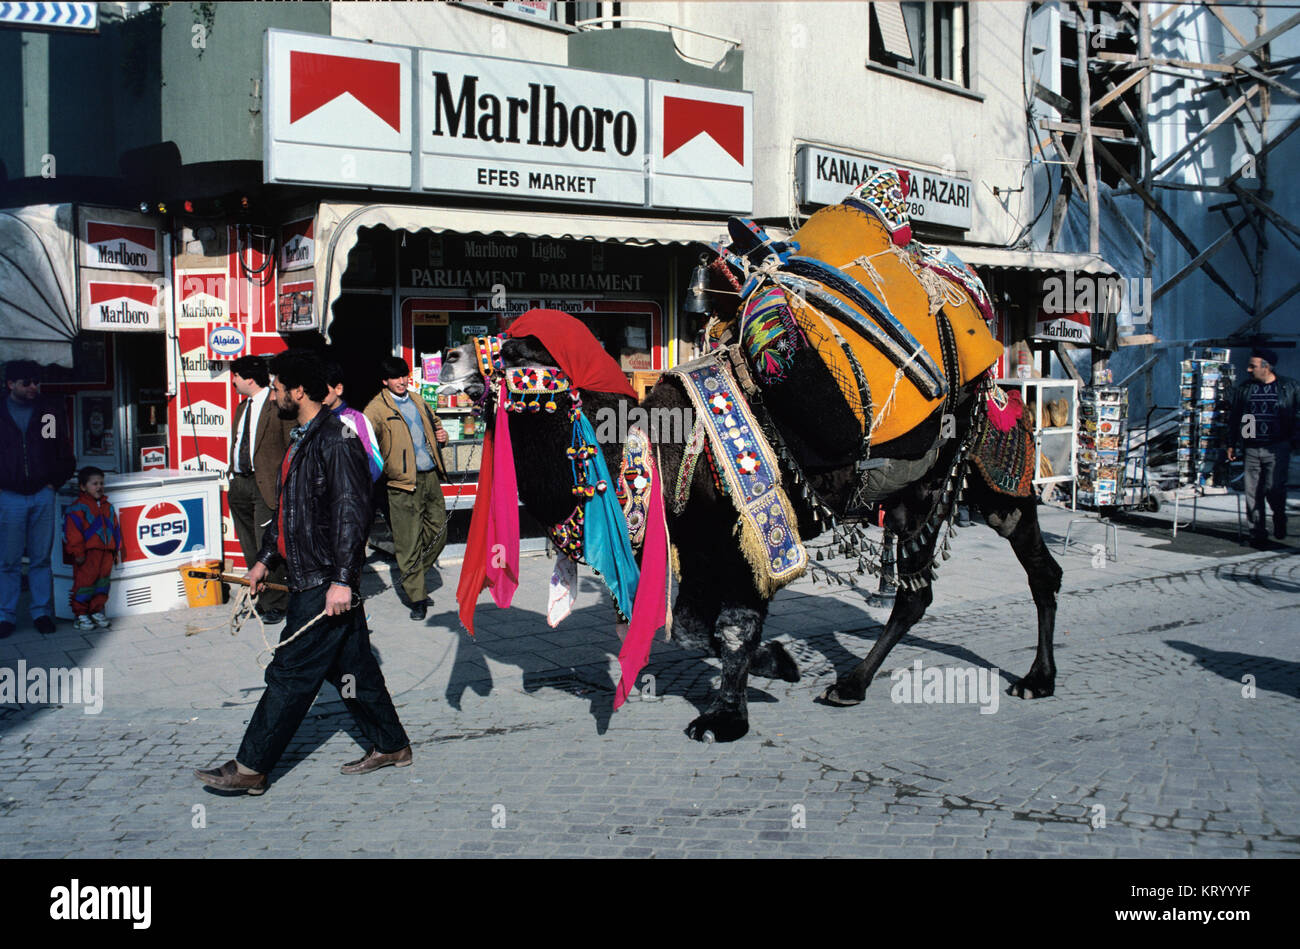 Man with Dressed Camel or Wrestling Camel Walking Down Street in Front of General Store, Convenience Store or Corner Shop in Selçuk, Aegean Region, Turkey Stock Photo